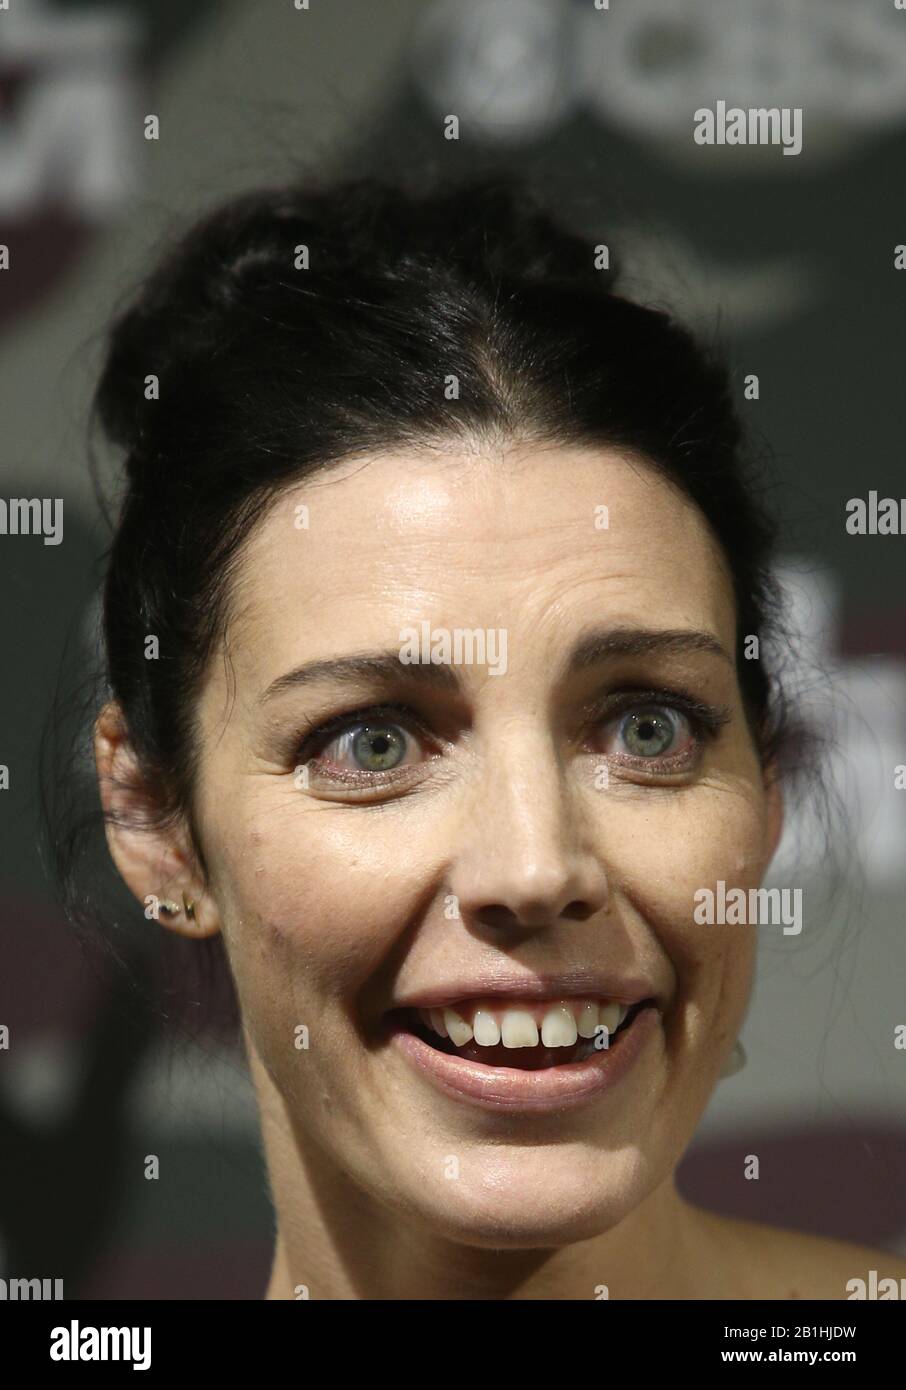 Hollywood, Ca. 25th Feb, 2020. Jessica Pare, at SEAL Team' TV show premiere at the Arclight in Hollywood, California on February 24, 2020. Credit: Faye Sadou/Media Punch/Alamy Live News Stock Photo